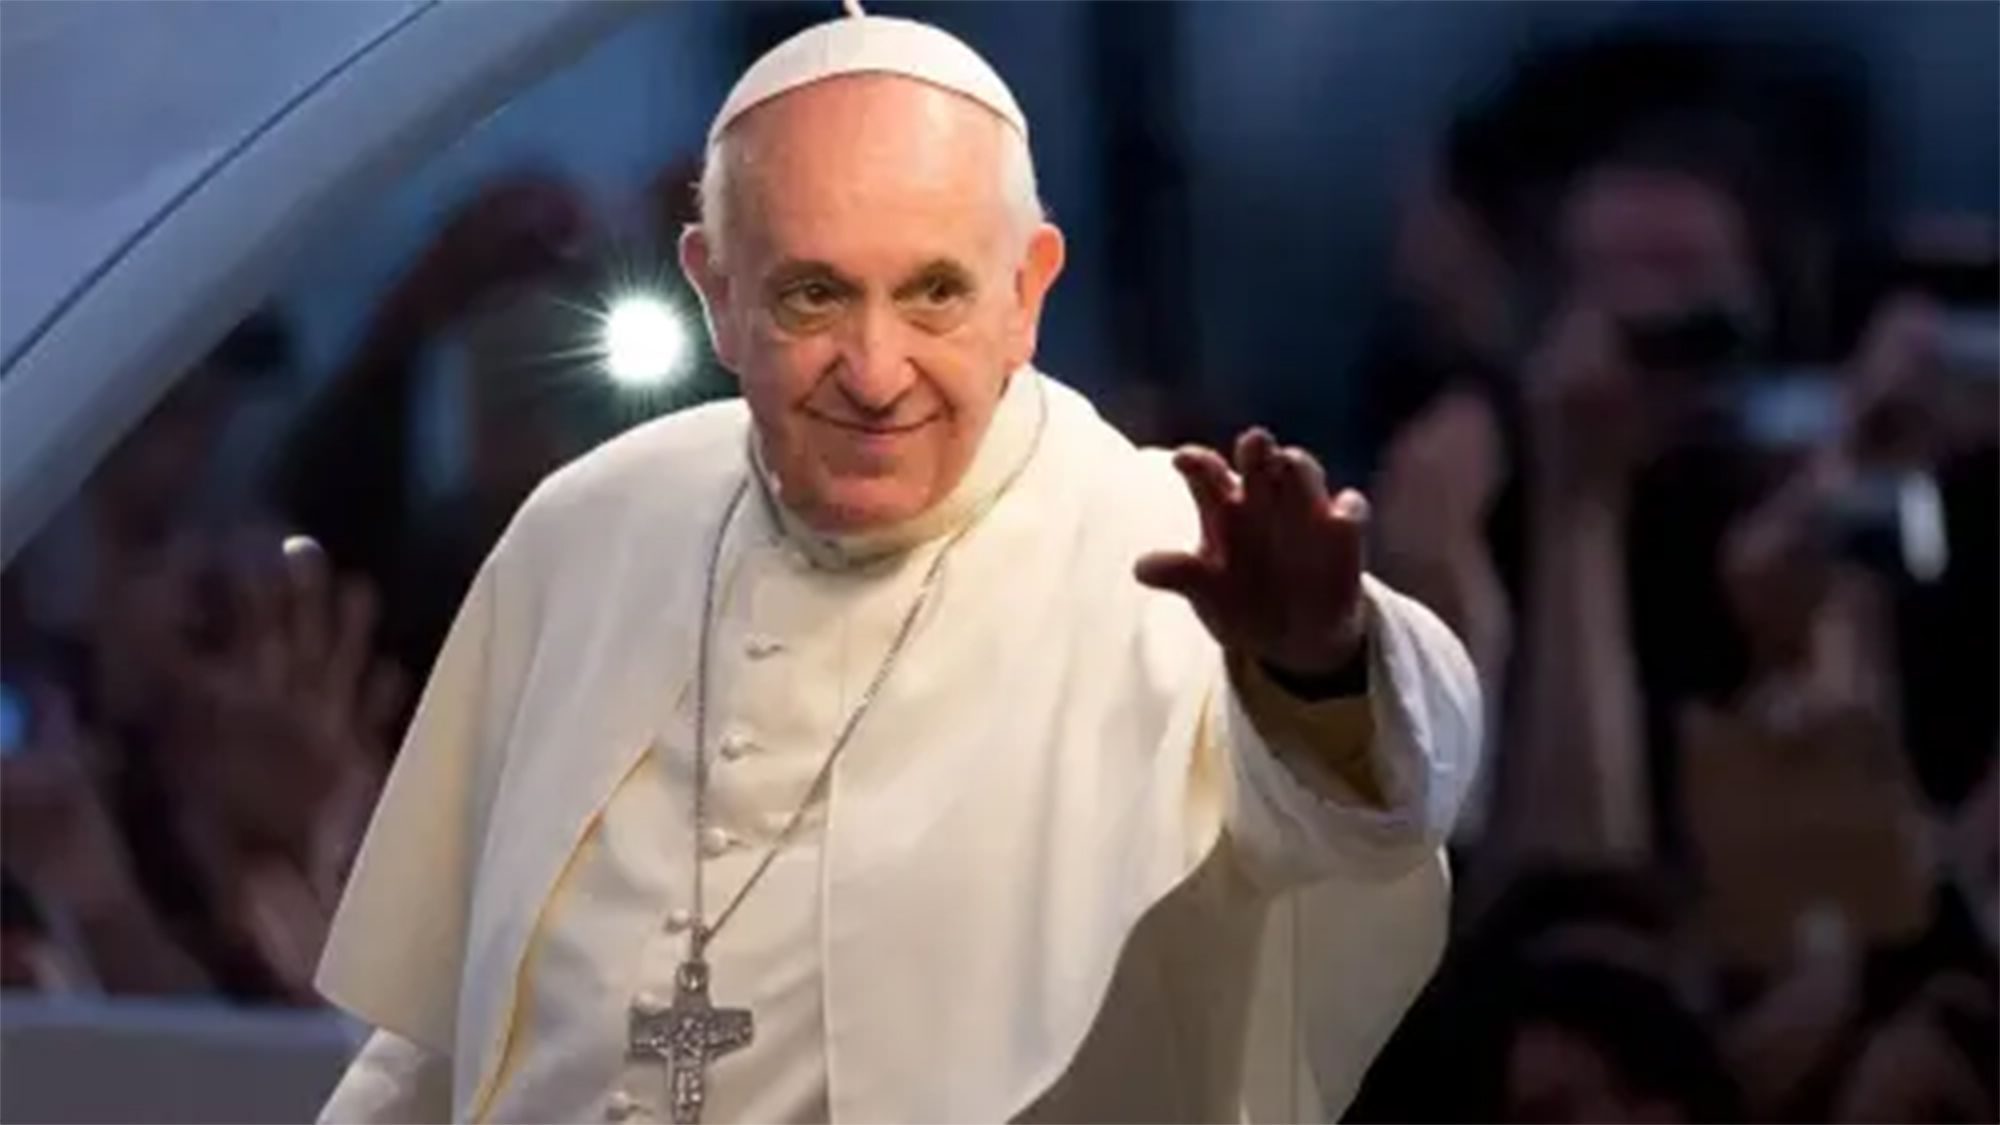 “Some wanted me dead” Pope Francis denounces conservative critics with jokes photo Flipboard